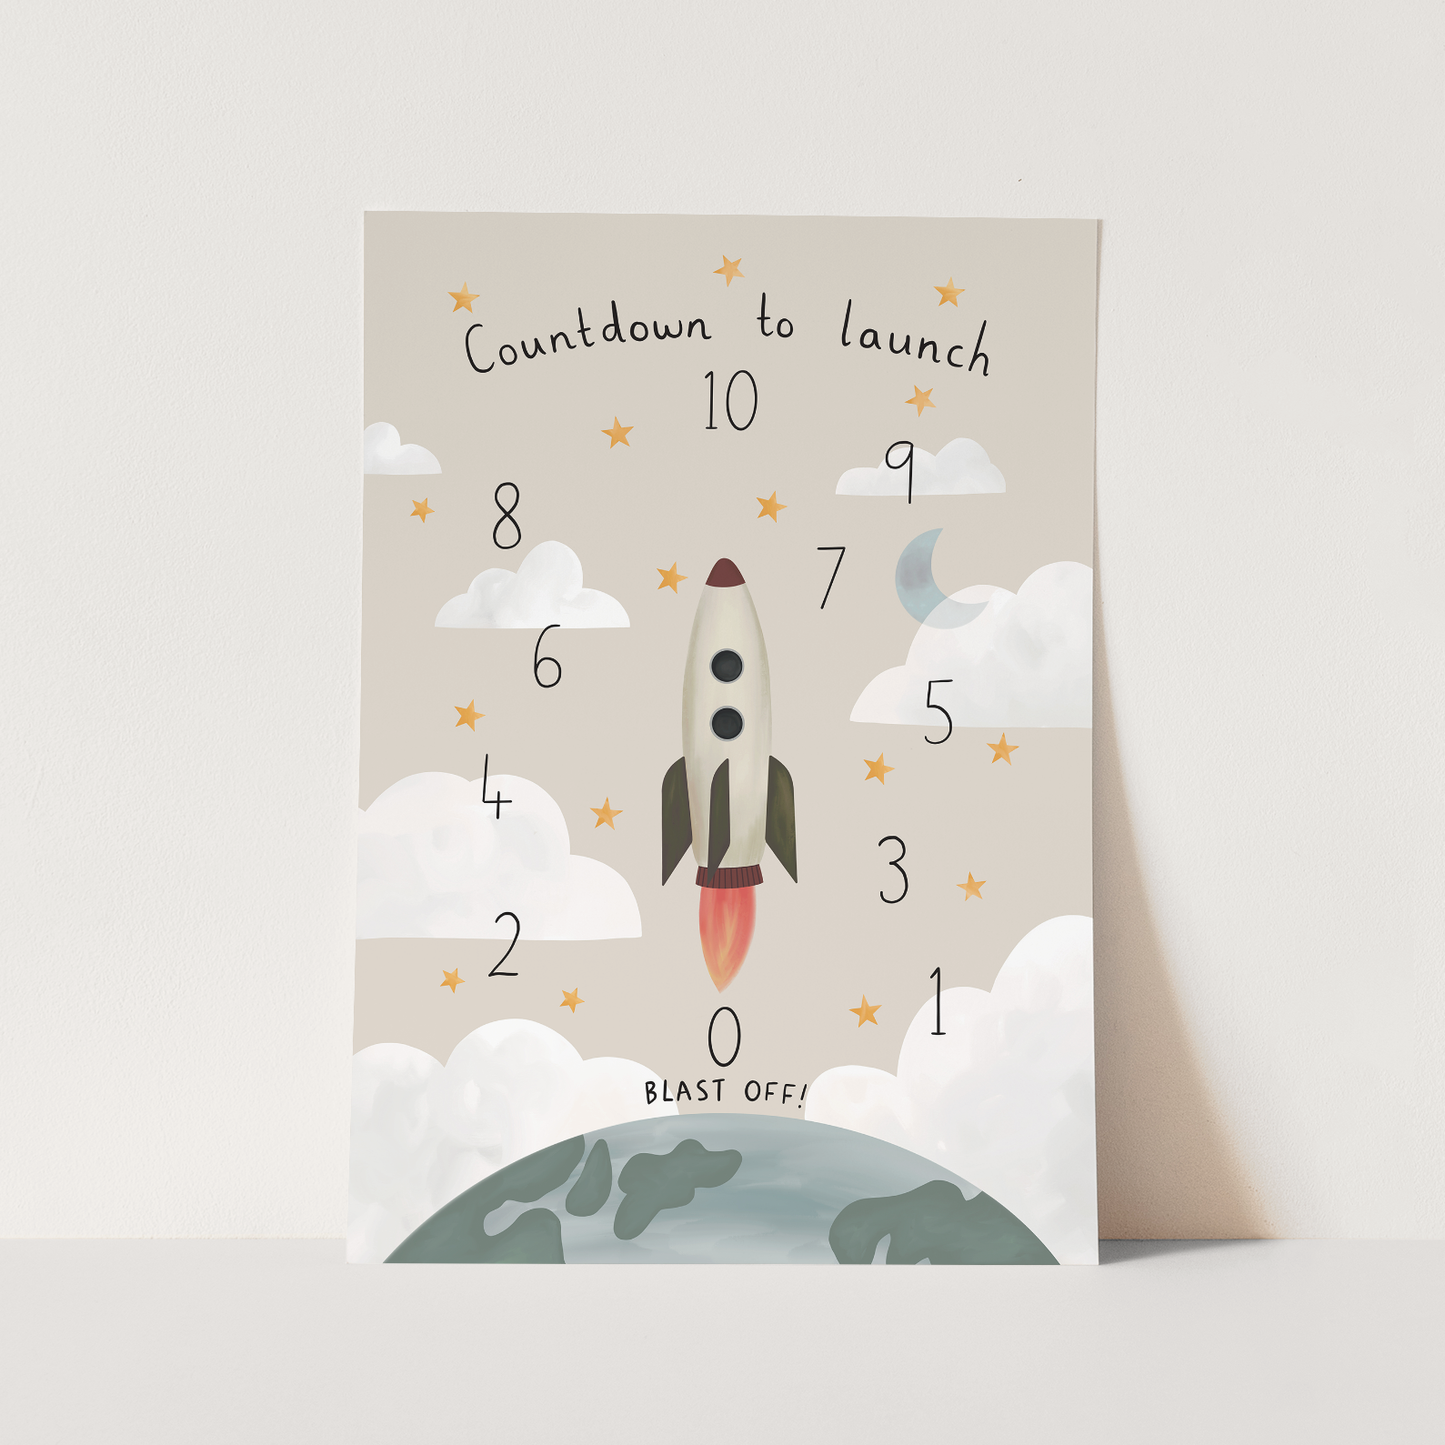 Countdown to launch in stone / Fine Art Print